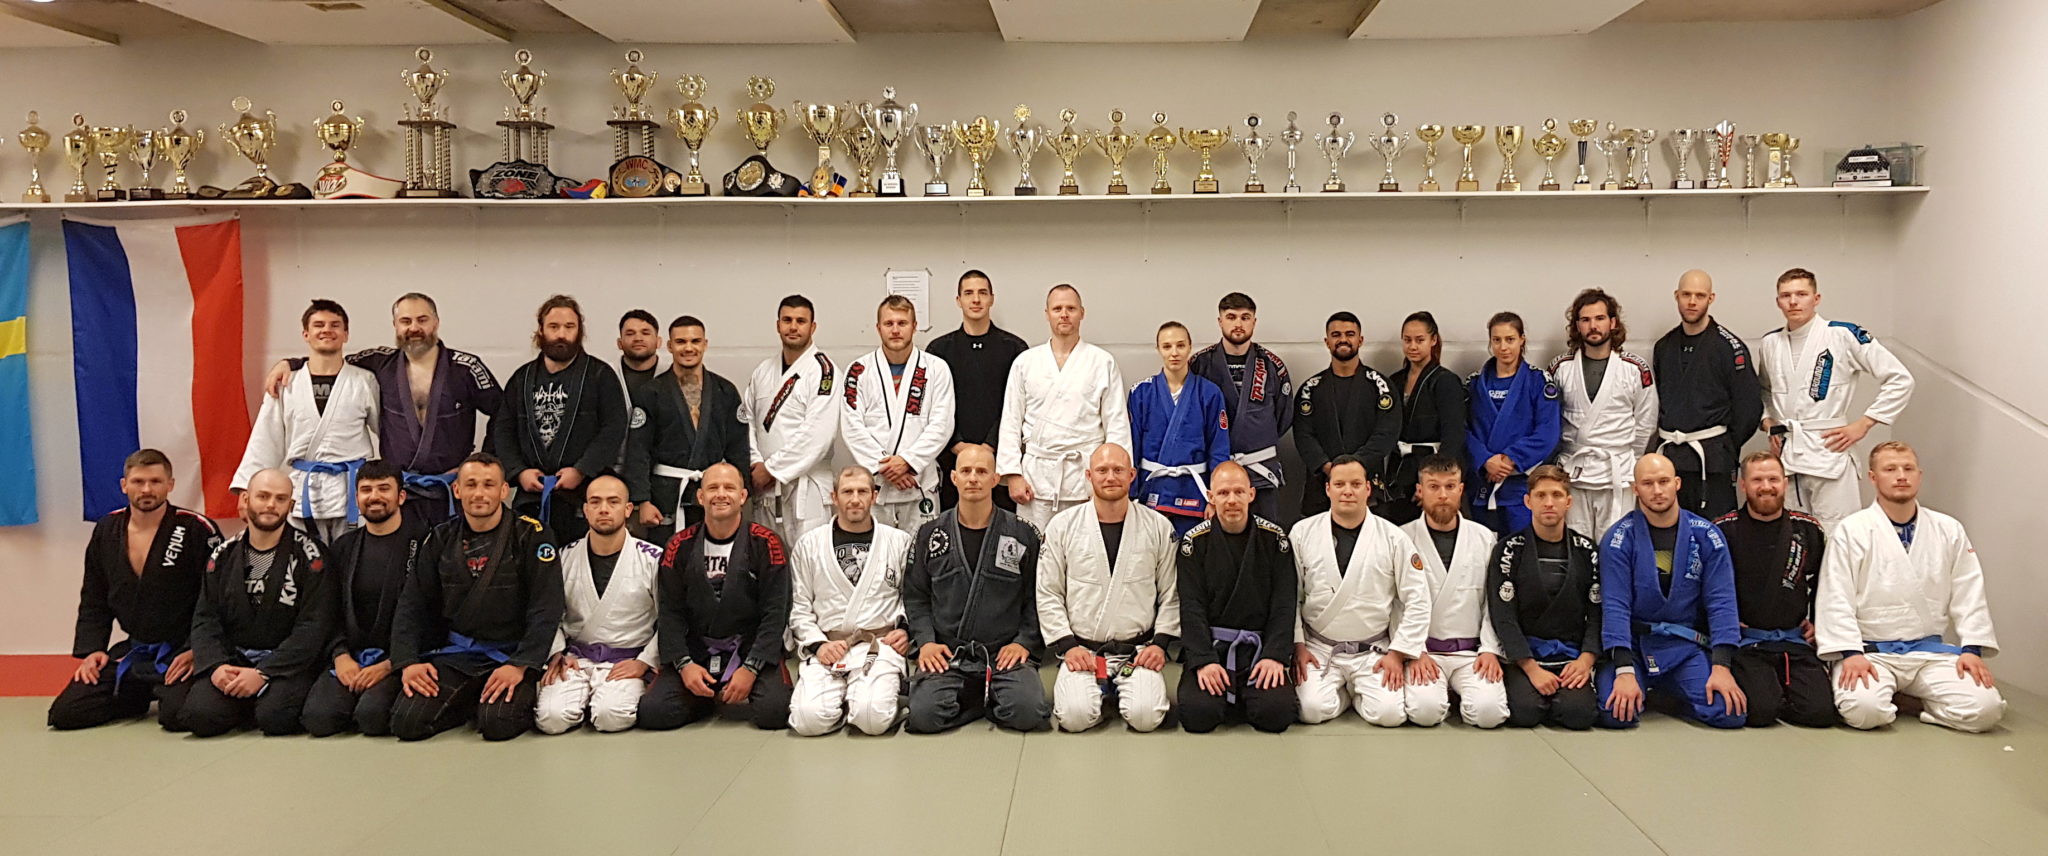 Great first day at the BJJ for beginners course!